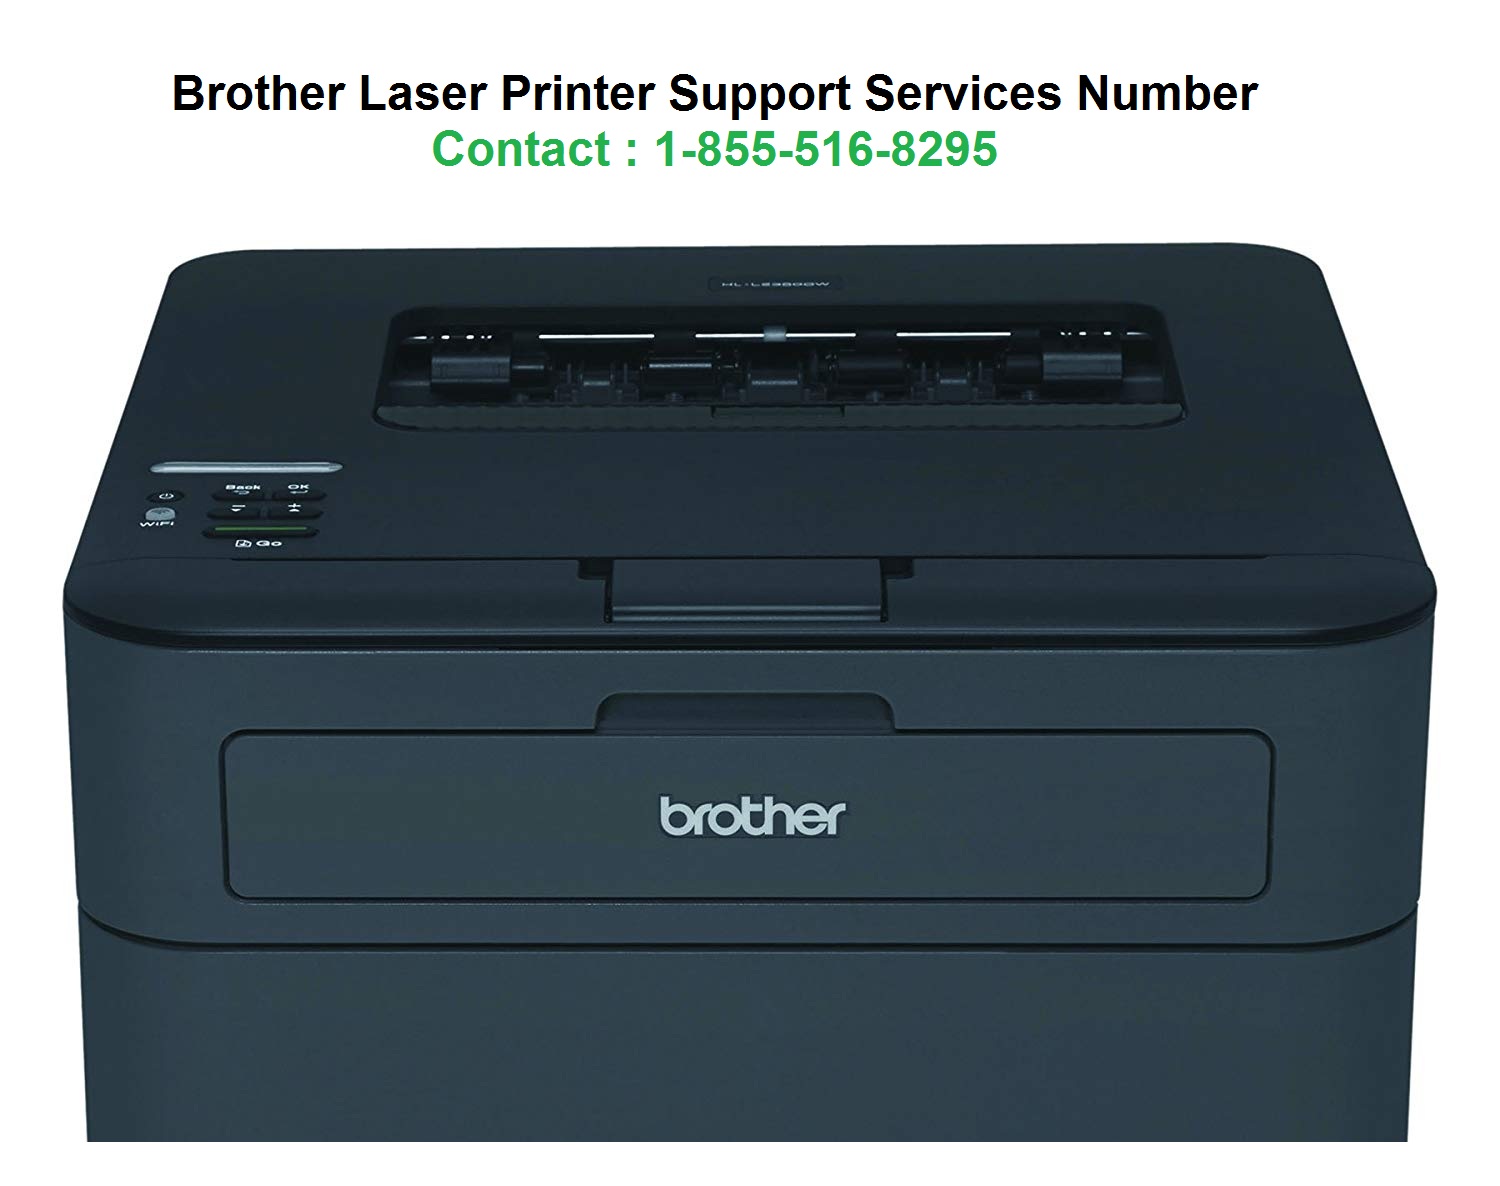 Brother Laser Printer Customer Service 1-855-516-8595 Contact Support Number, Allegany, New York, United States